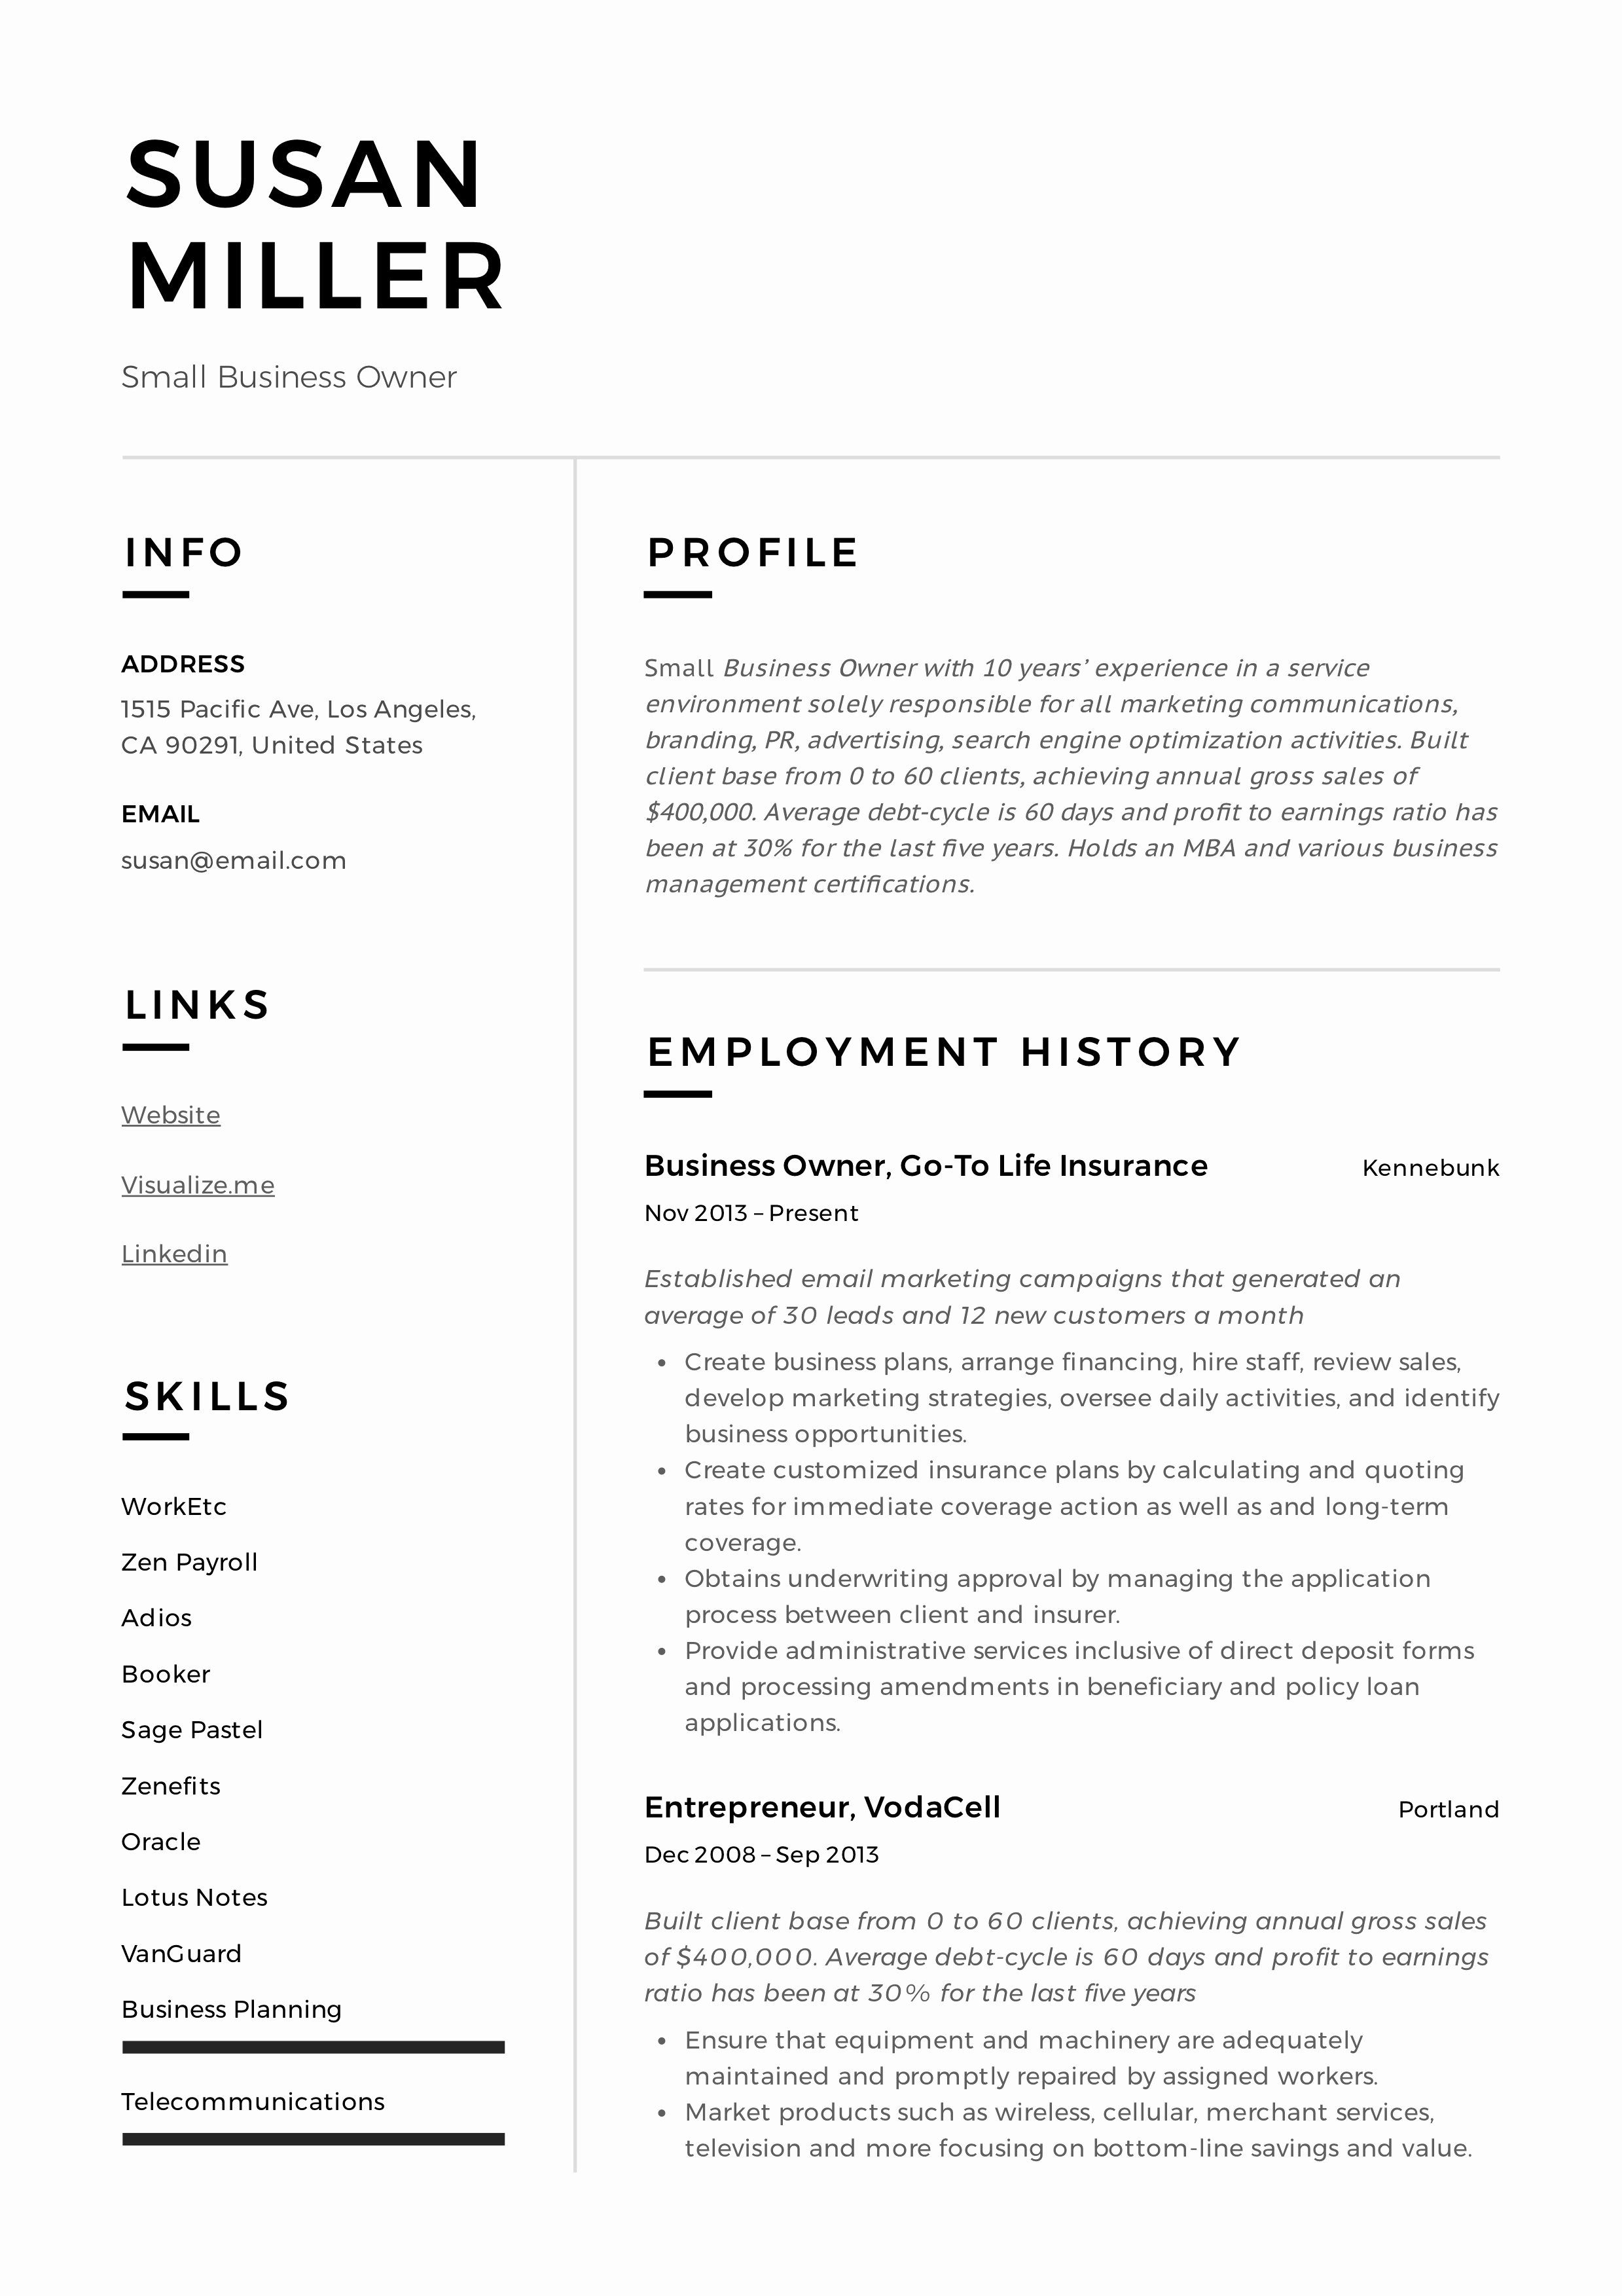 Small Business Owner Resume New Small Business Owner Resume Guide 12 Examples Pdf